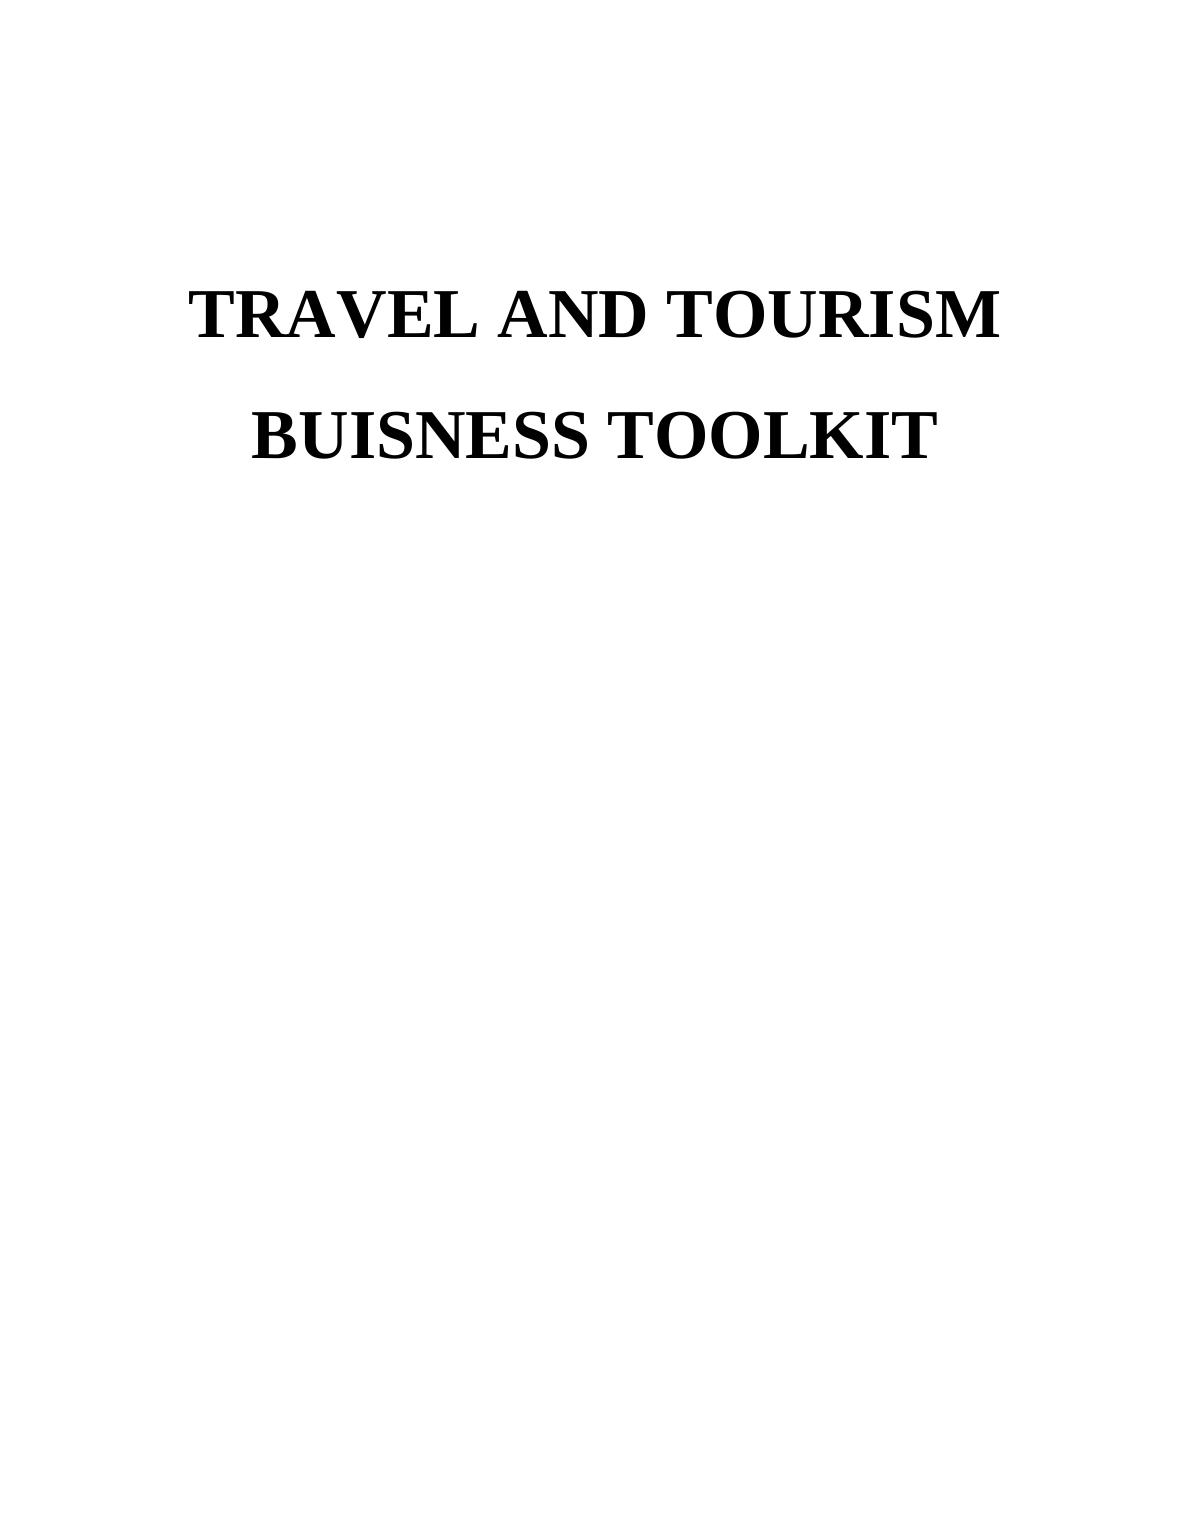 Rational and Principles of Revenue Management in Travel and Tourism Industry_1